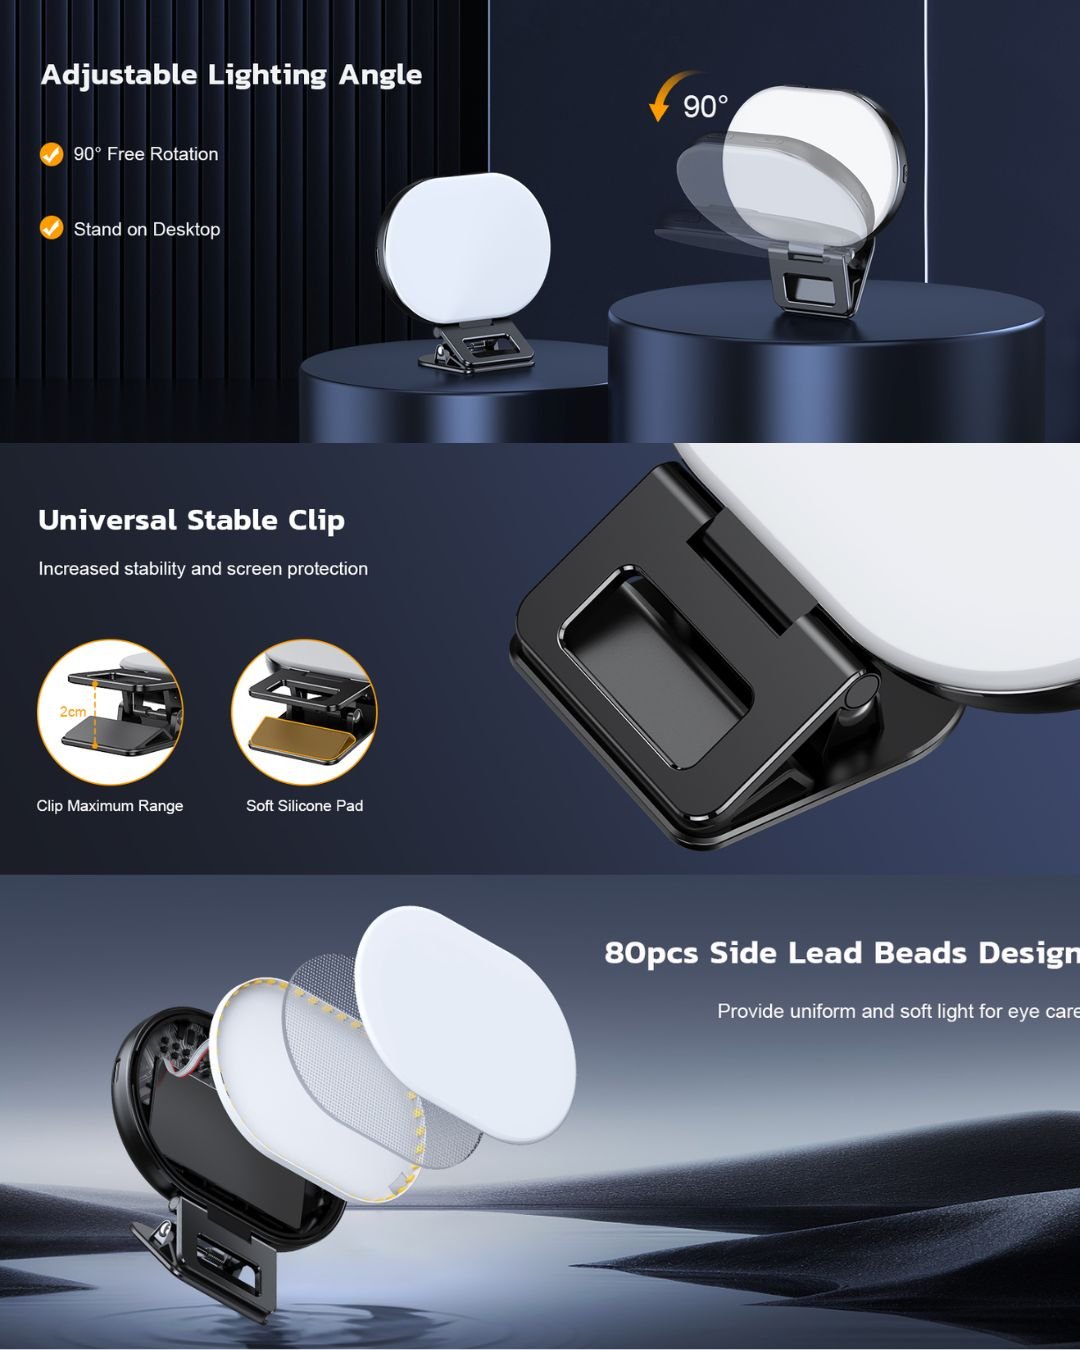 Best LED Selfie Light with Clip - 3 Modes, 10 Brightness Levels, Rechargeable for iPhone, Android, TikTok, Video - mylensball